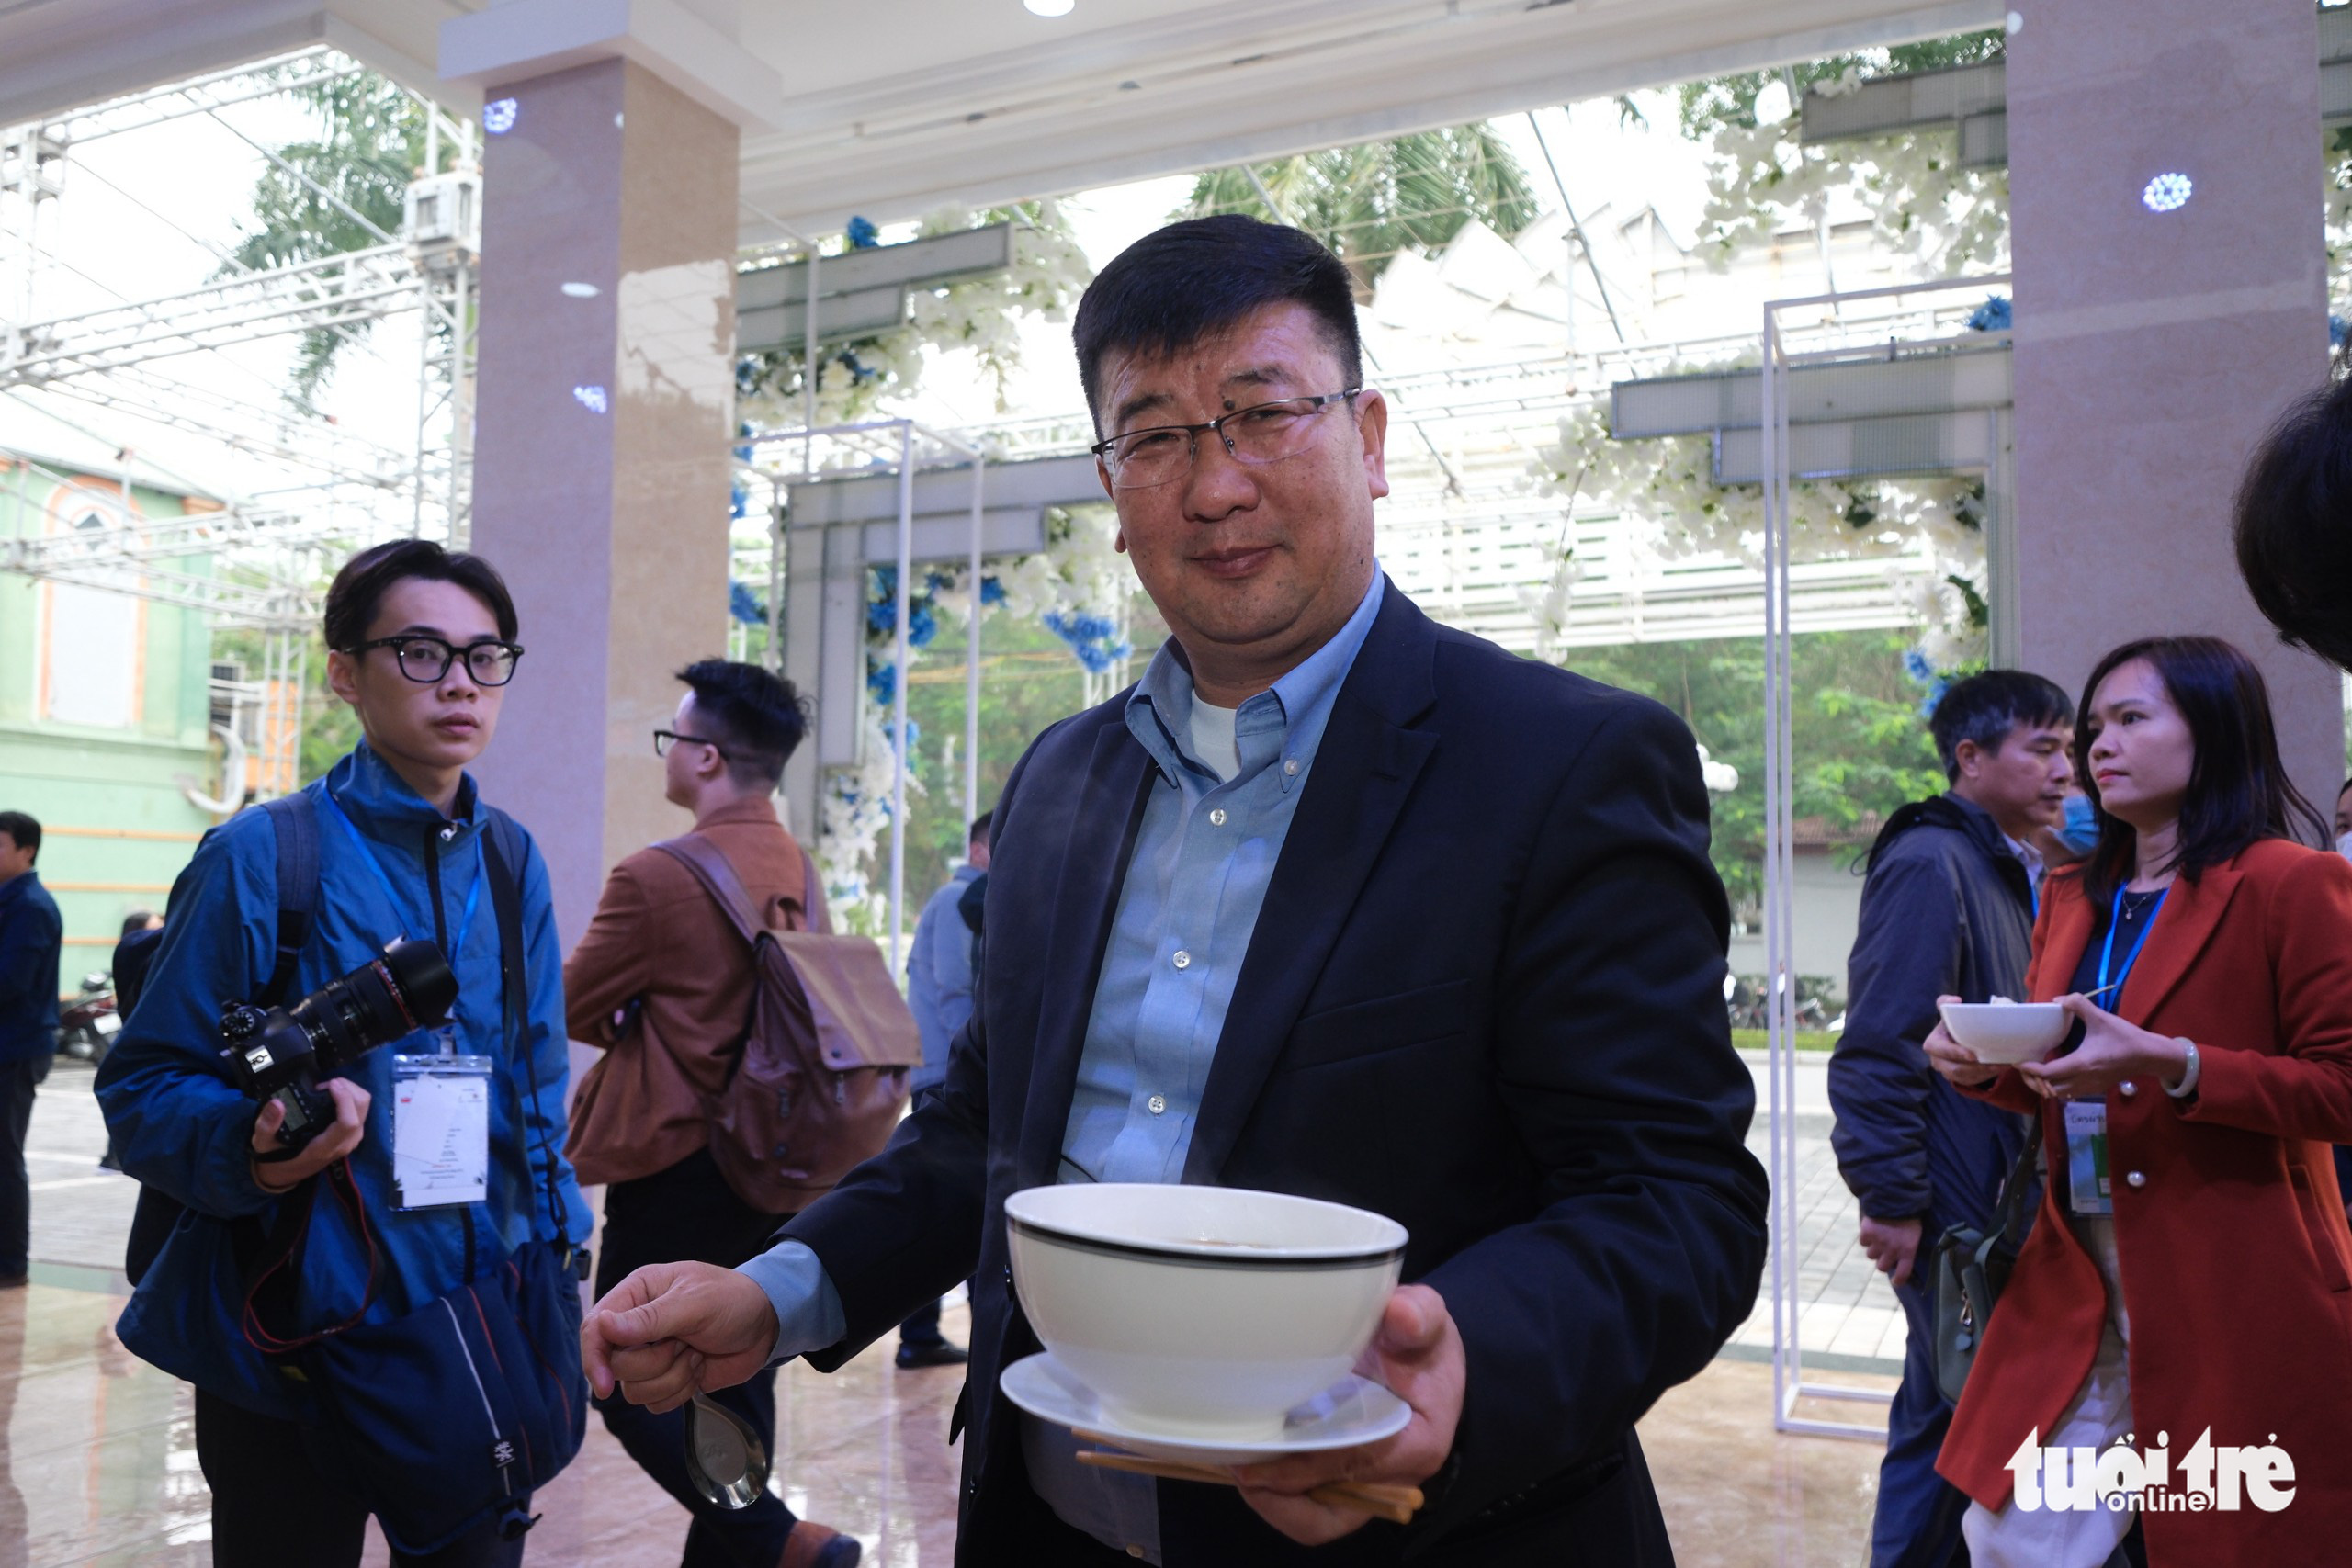 Mongolian Ambassador to Vietnam Jigjee Sereejav experiences pho at the Day of Pho event organized by Tuoi Tre (Youth) newspaper in Nam Dinh Province, Vietnam, December 10, 2022. Photo: Nam Tran / Tuoi Tre